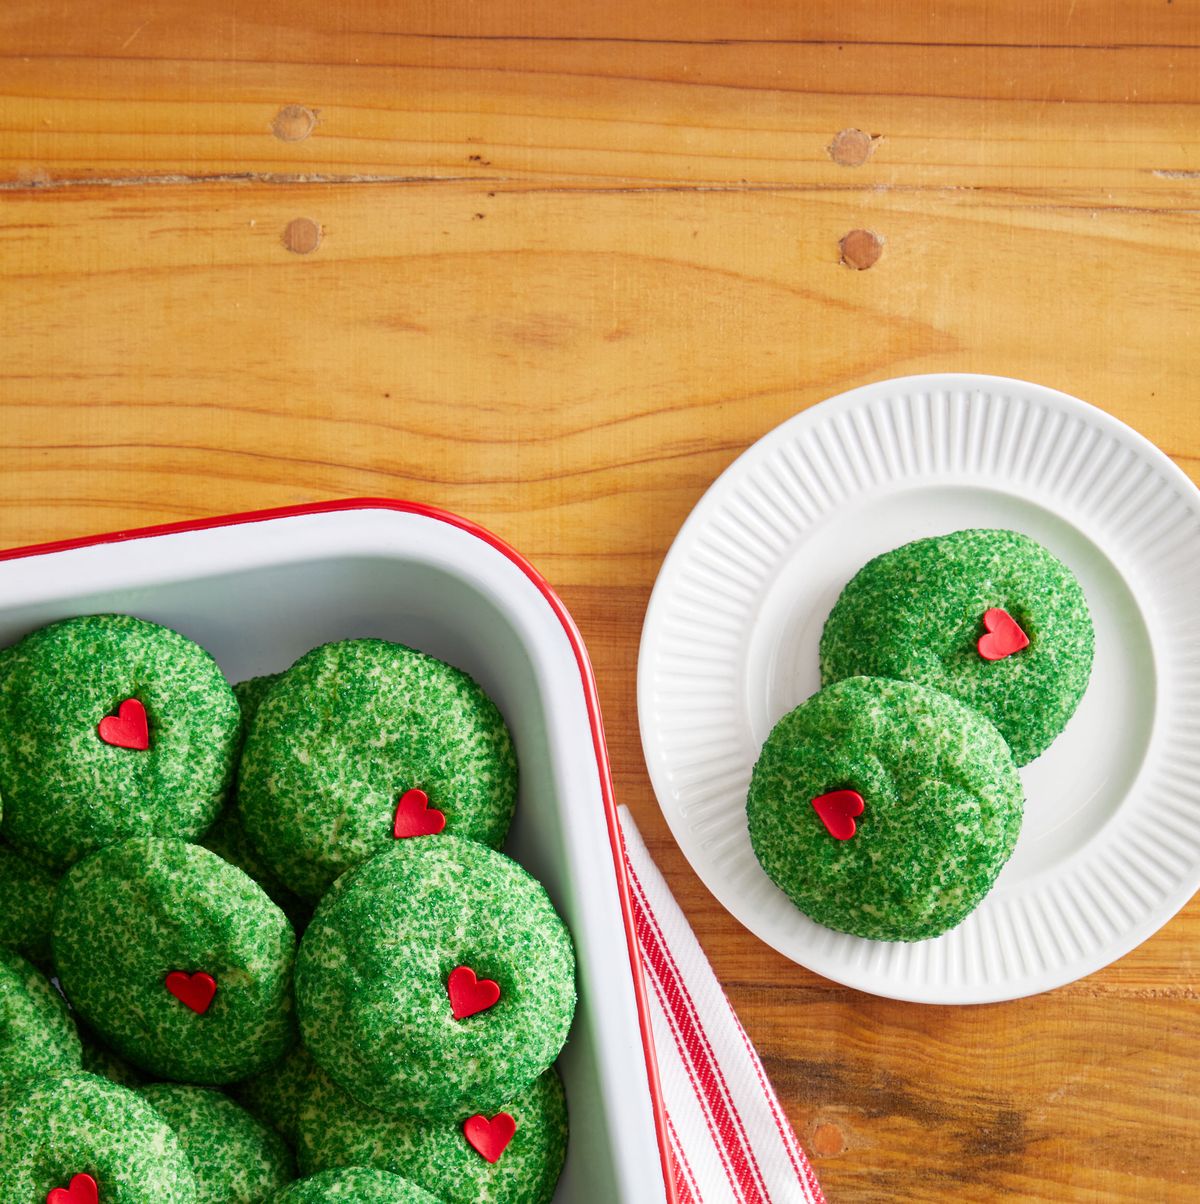 Save on Grinch, Bowls